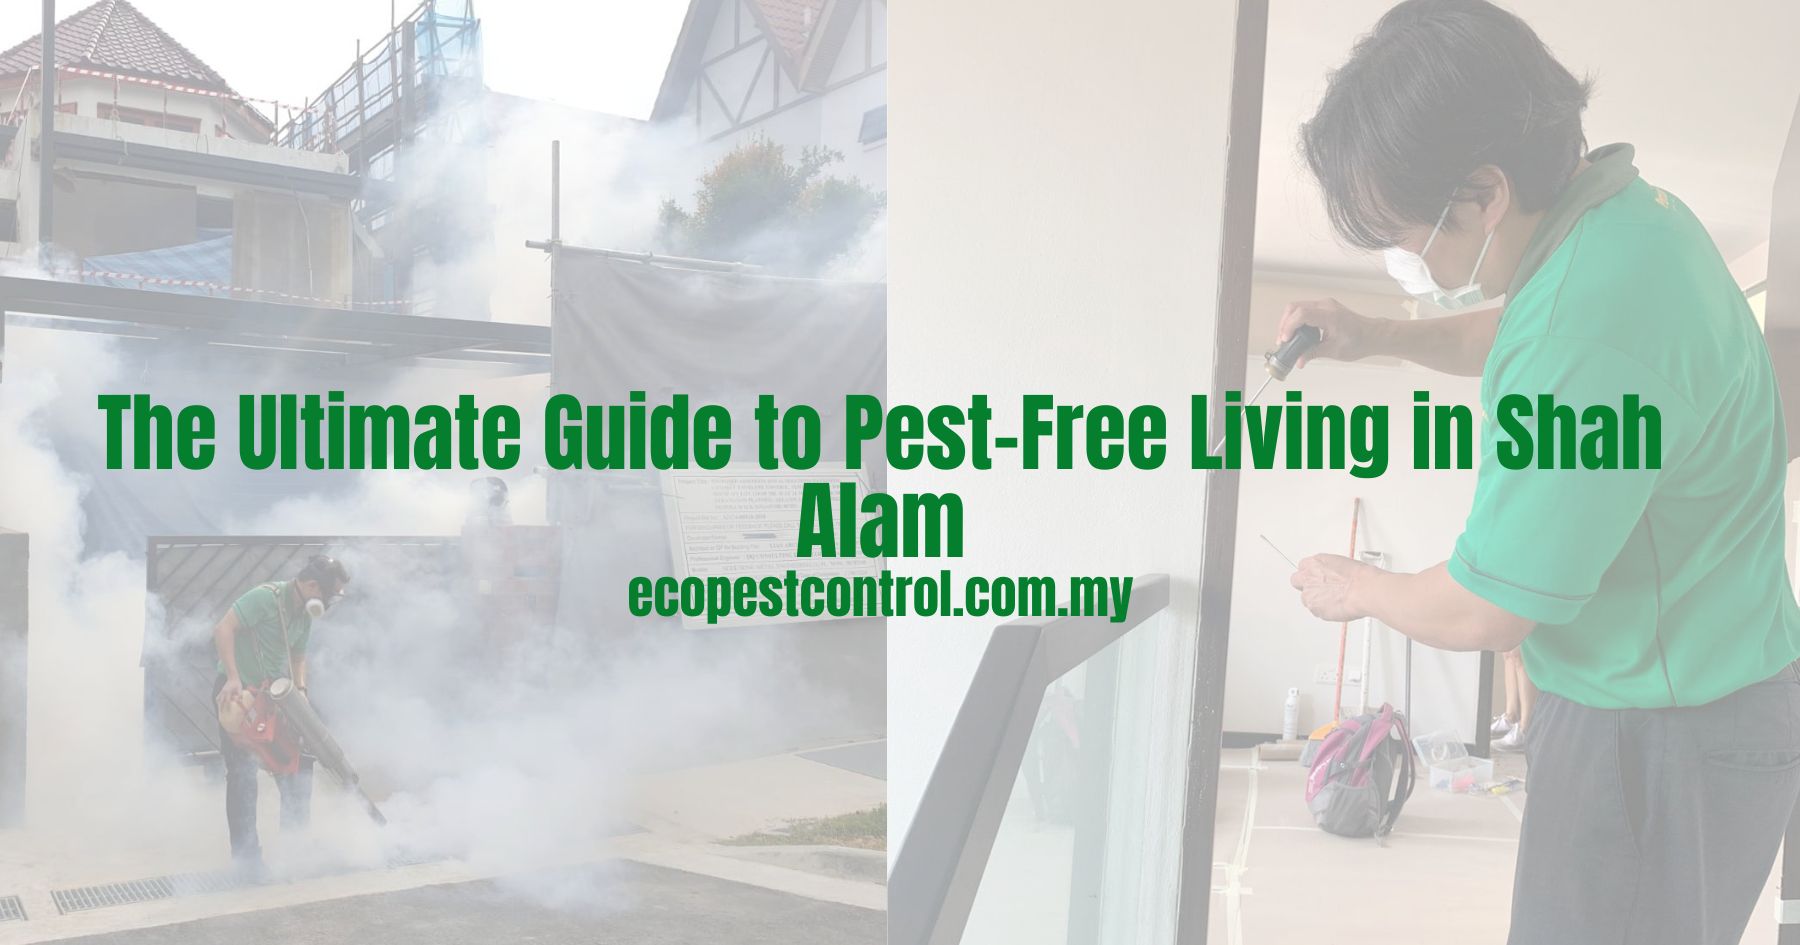 The Ultimate Guide to Pest-Free Living in Shah Alam